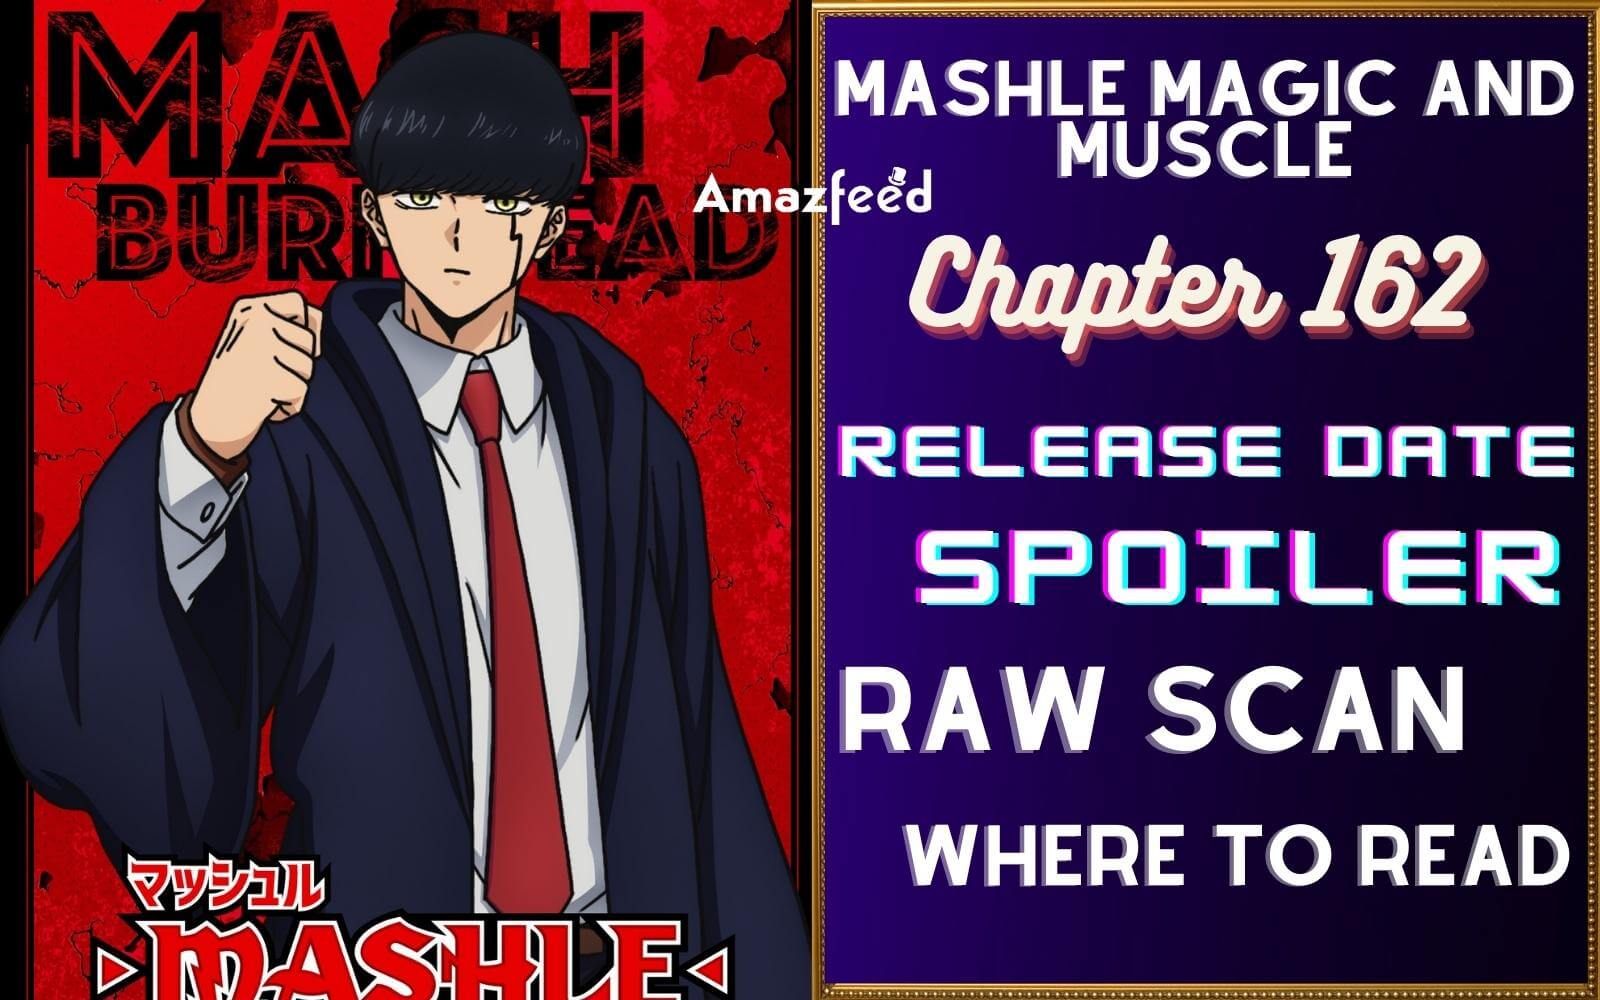 Mashle: Magic And Muscles Chapter 162 Review - Mash Burnedead And